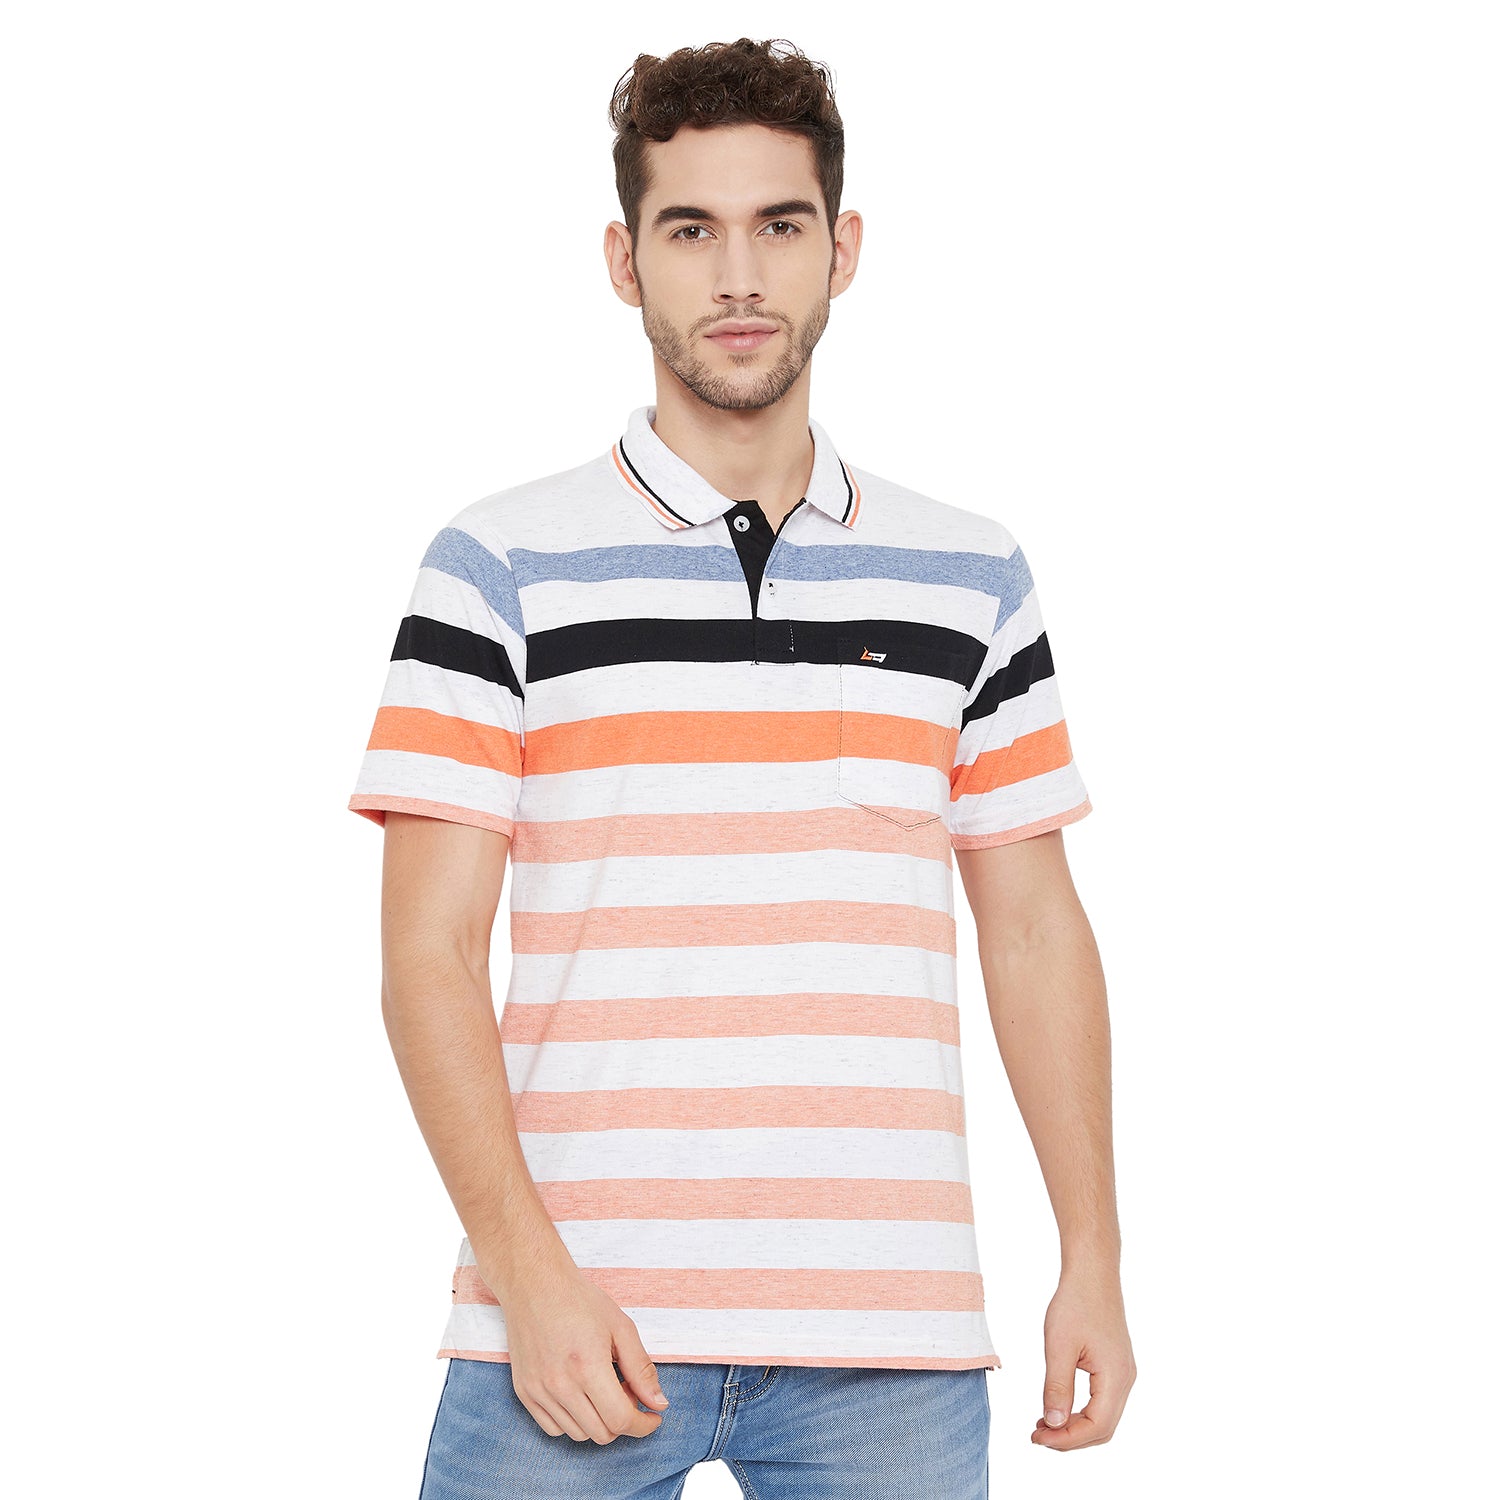 Polo Neck Half Sleeves Multicolor Striped T-Shirt With Pocket For Men- Orange